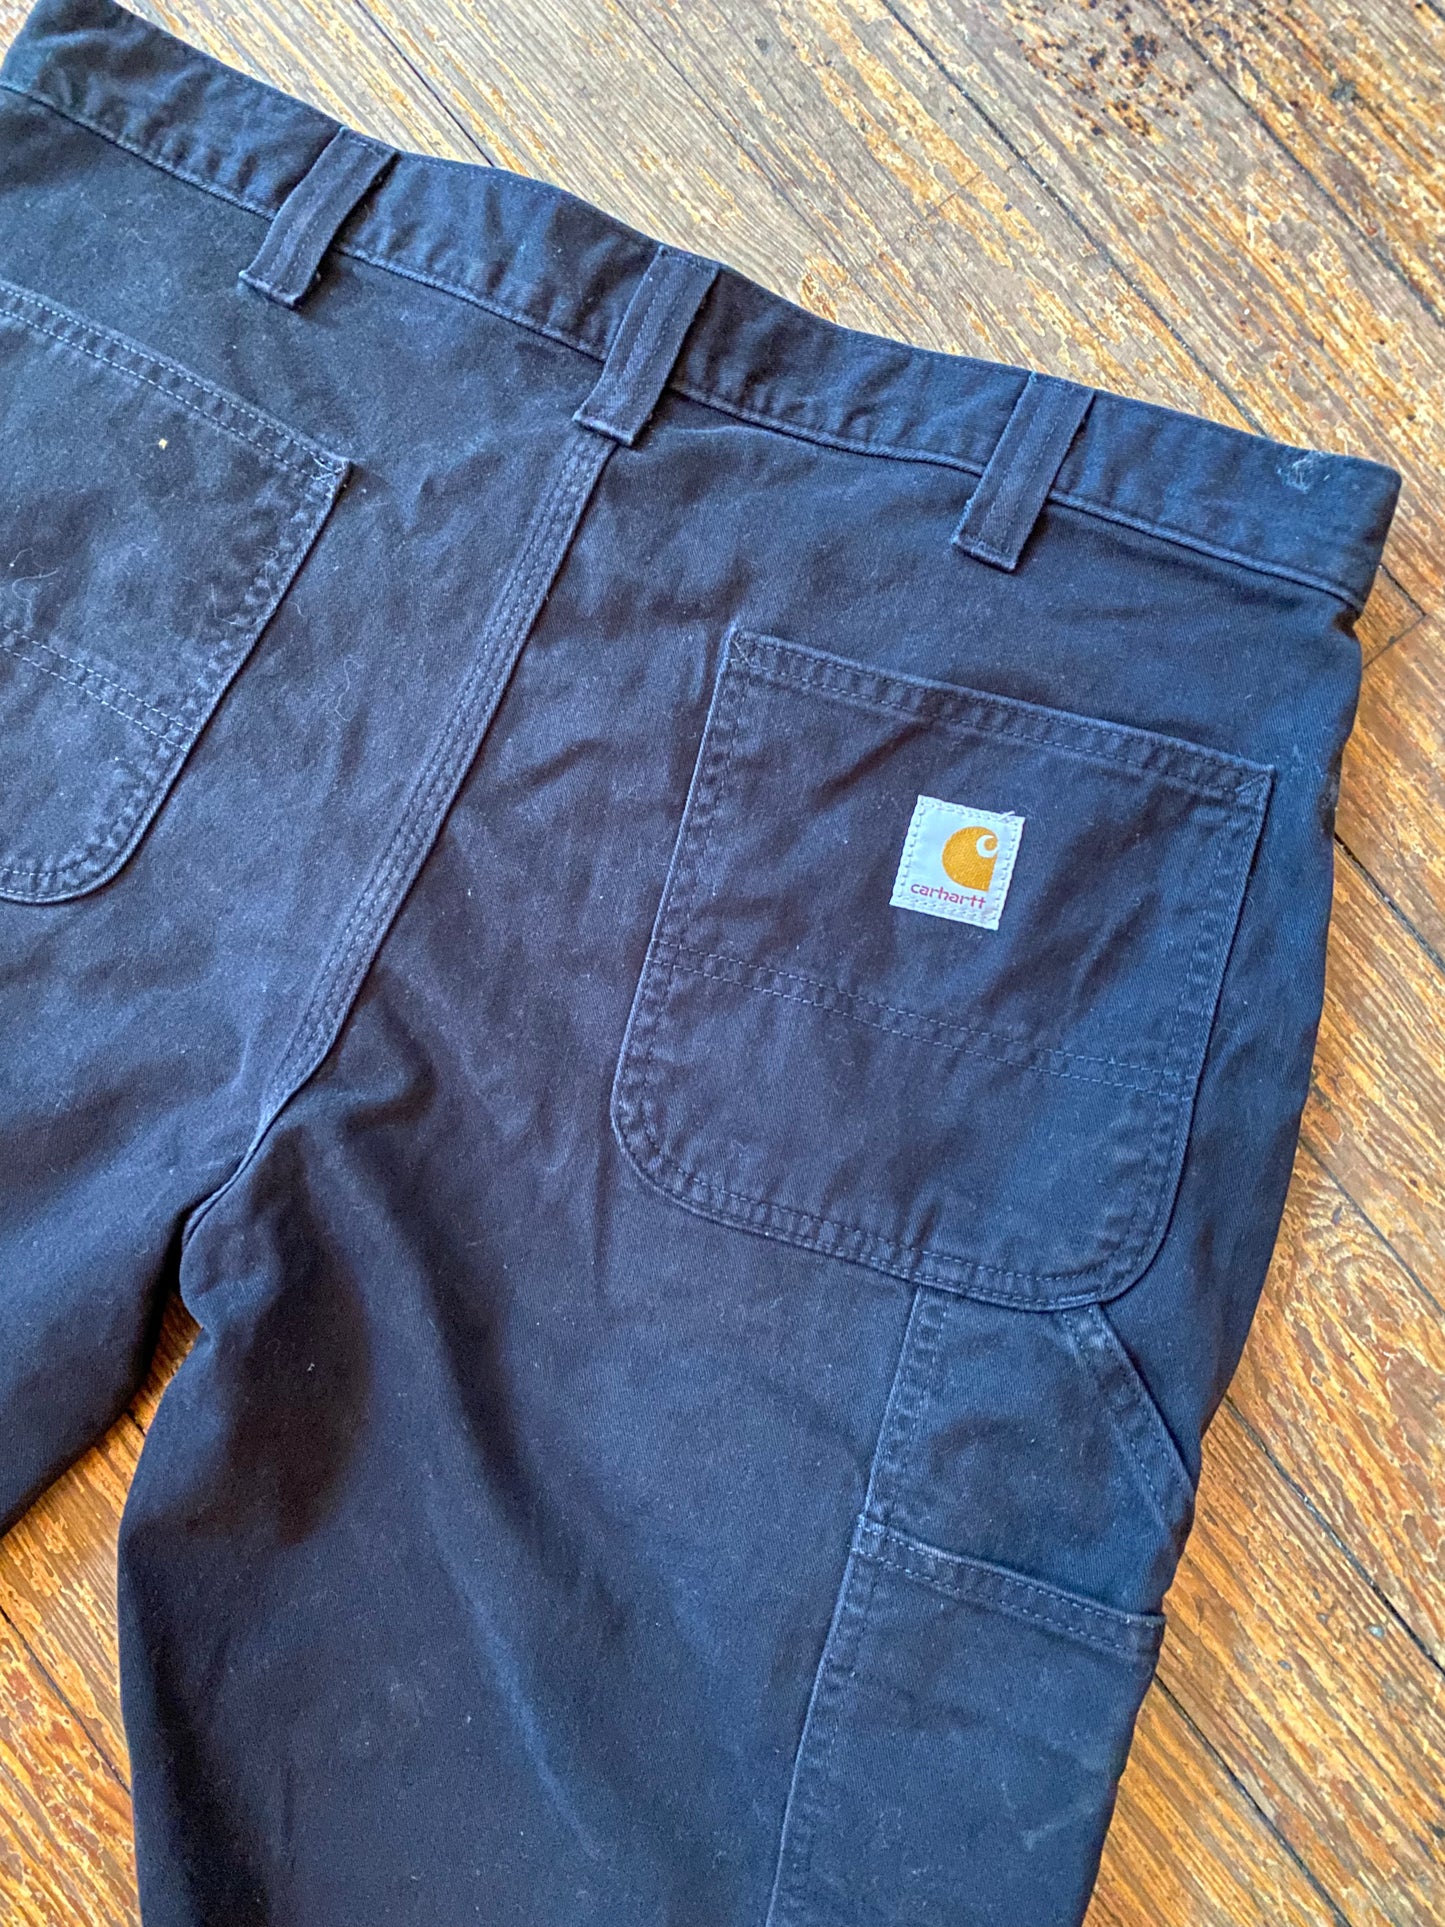 Carhartt Black Relaxed Fit Twill Utility Work Pant